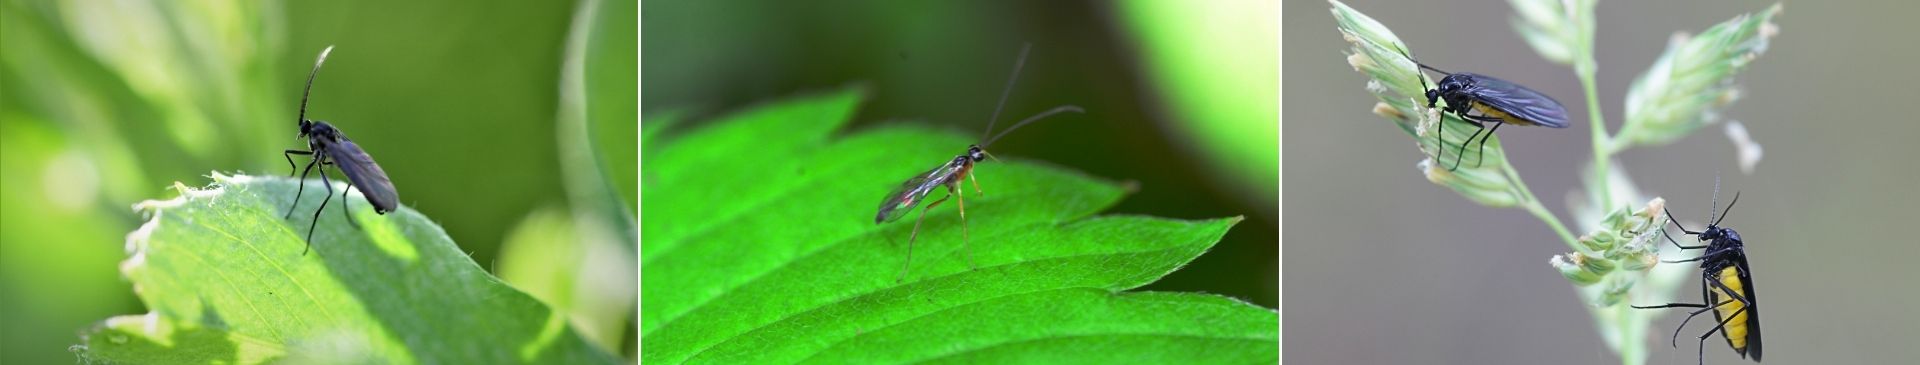 Fungus Gnats: Combining Annoyance and Unseen Danger